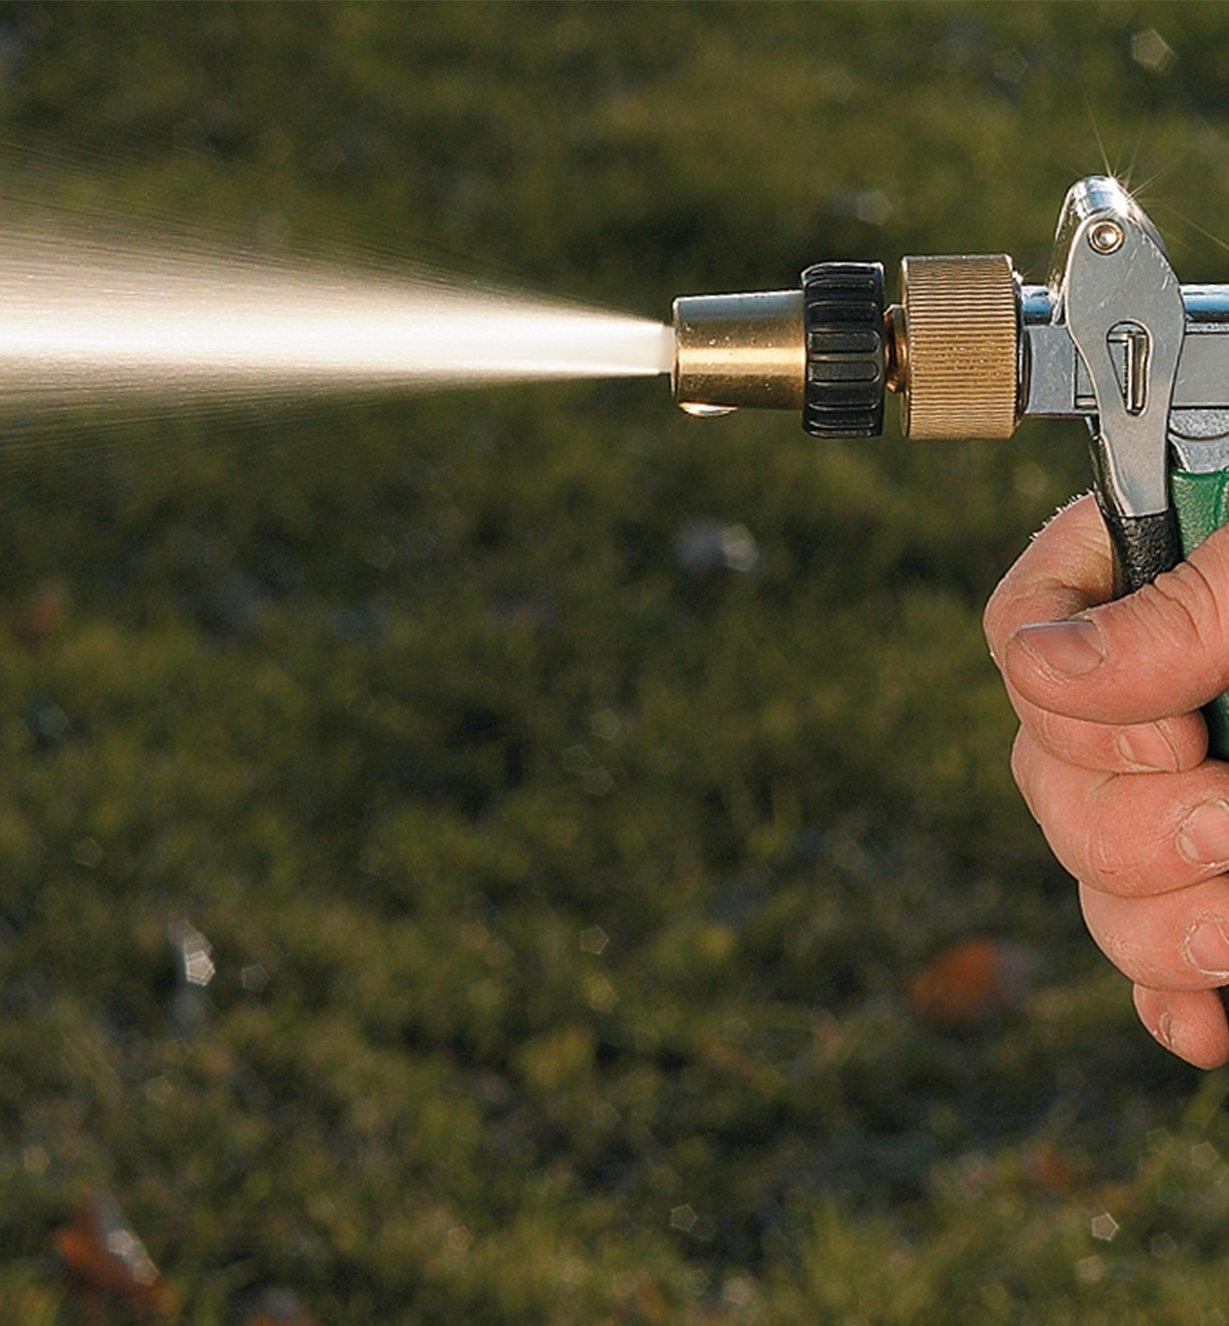 Water Gun spraying with the full action setting